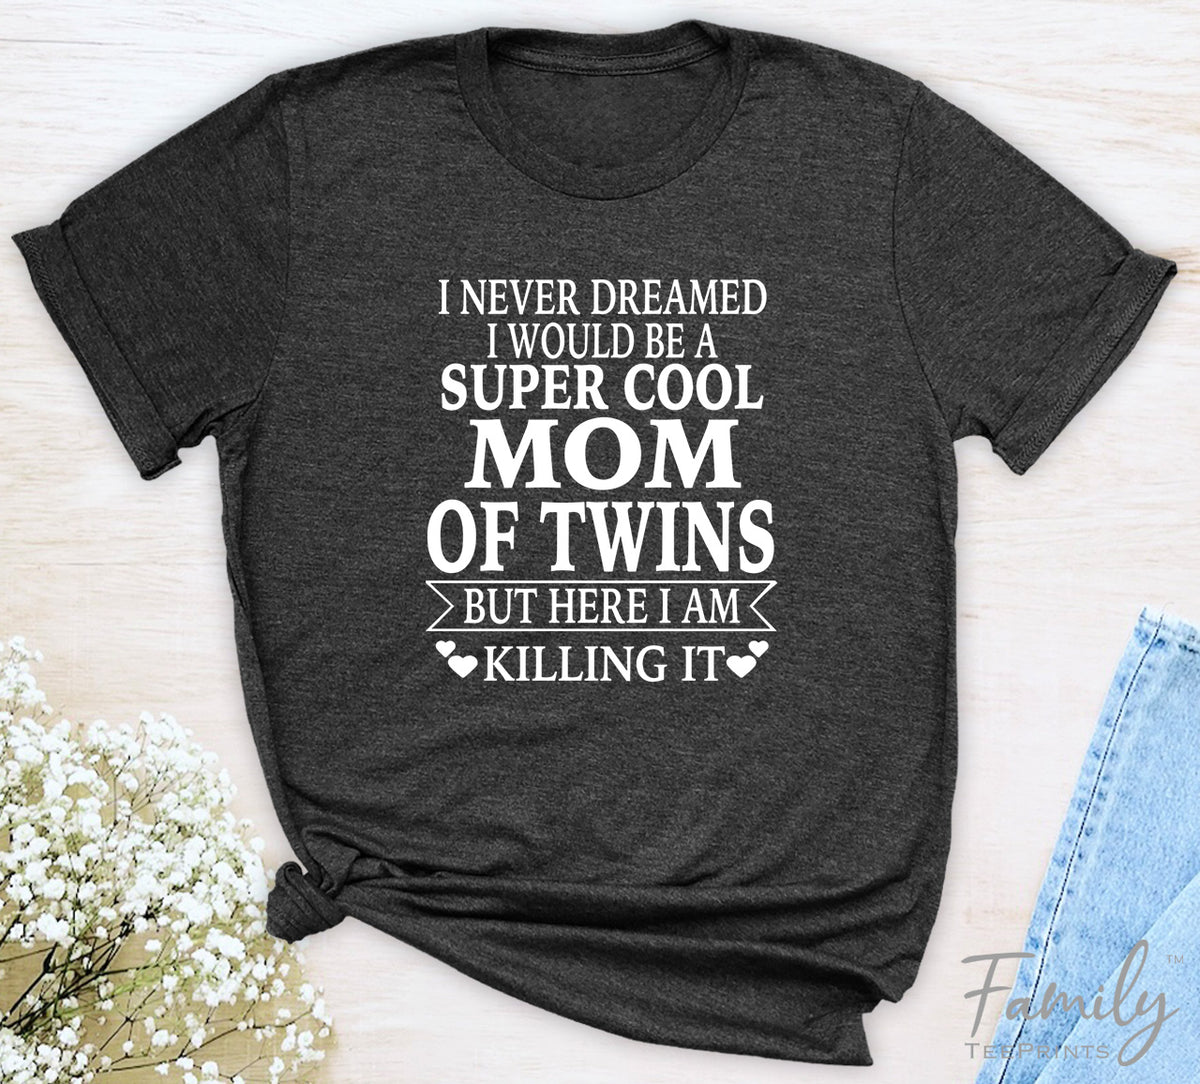 I Never Dreamed I'd Be A Super Cool Mom Of Twins...- Unisex T-shirt - Mom Of Twins Shirt - Gift For Mom Of Twins - familyteeprints